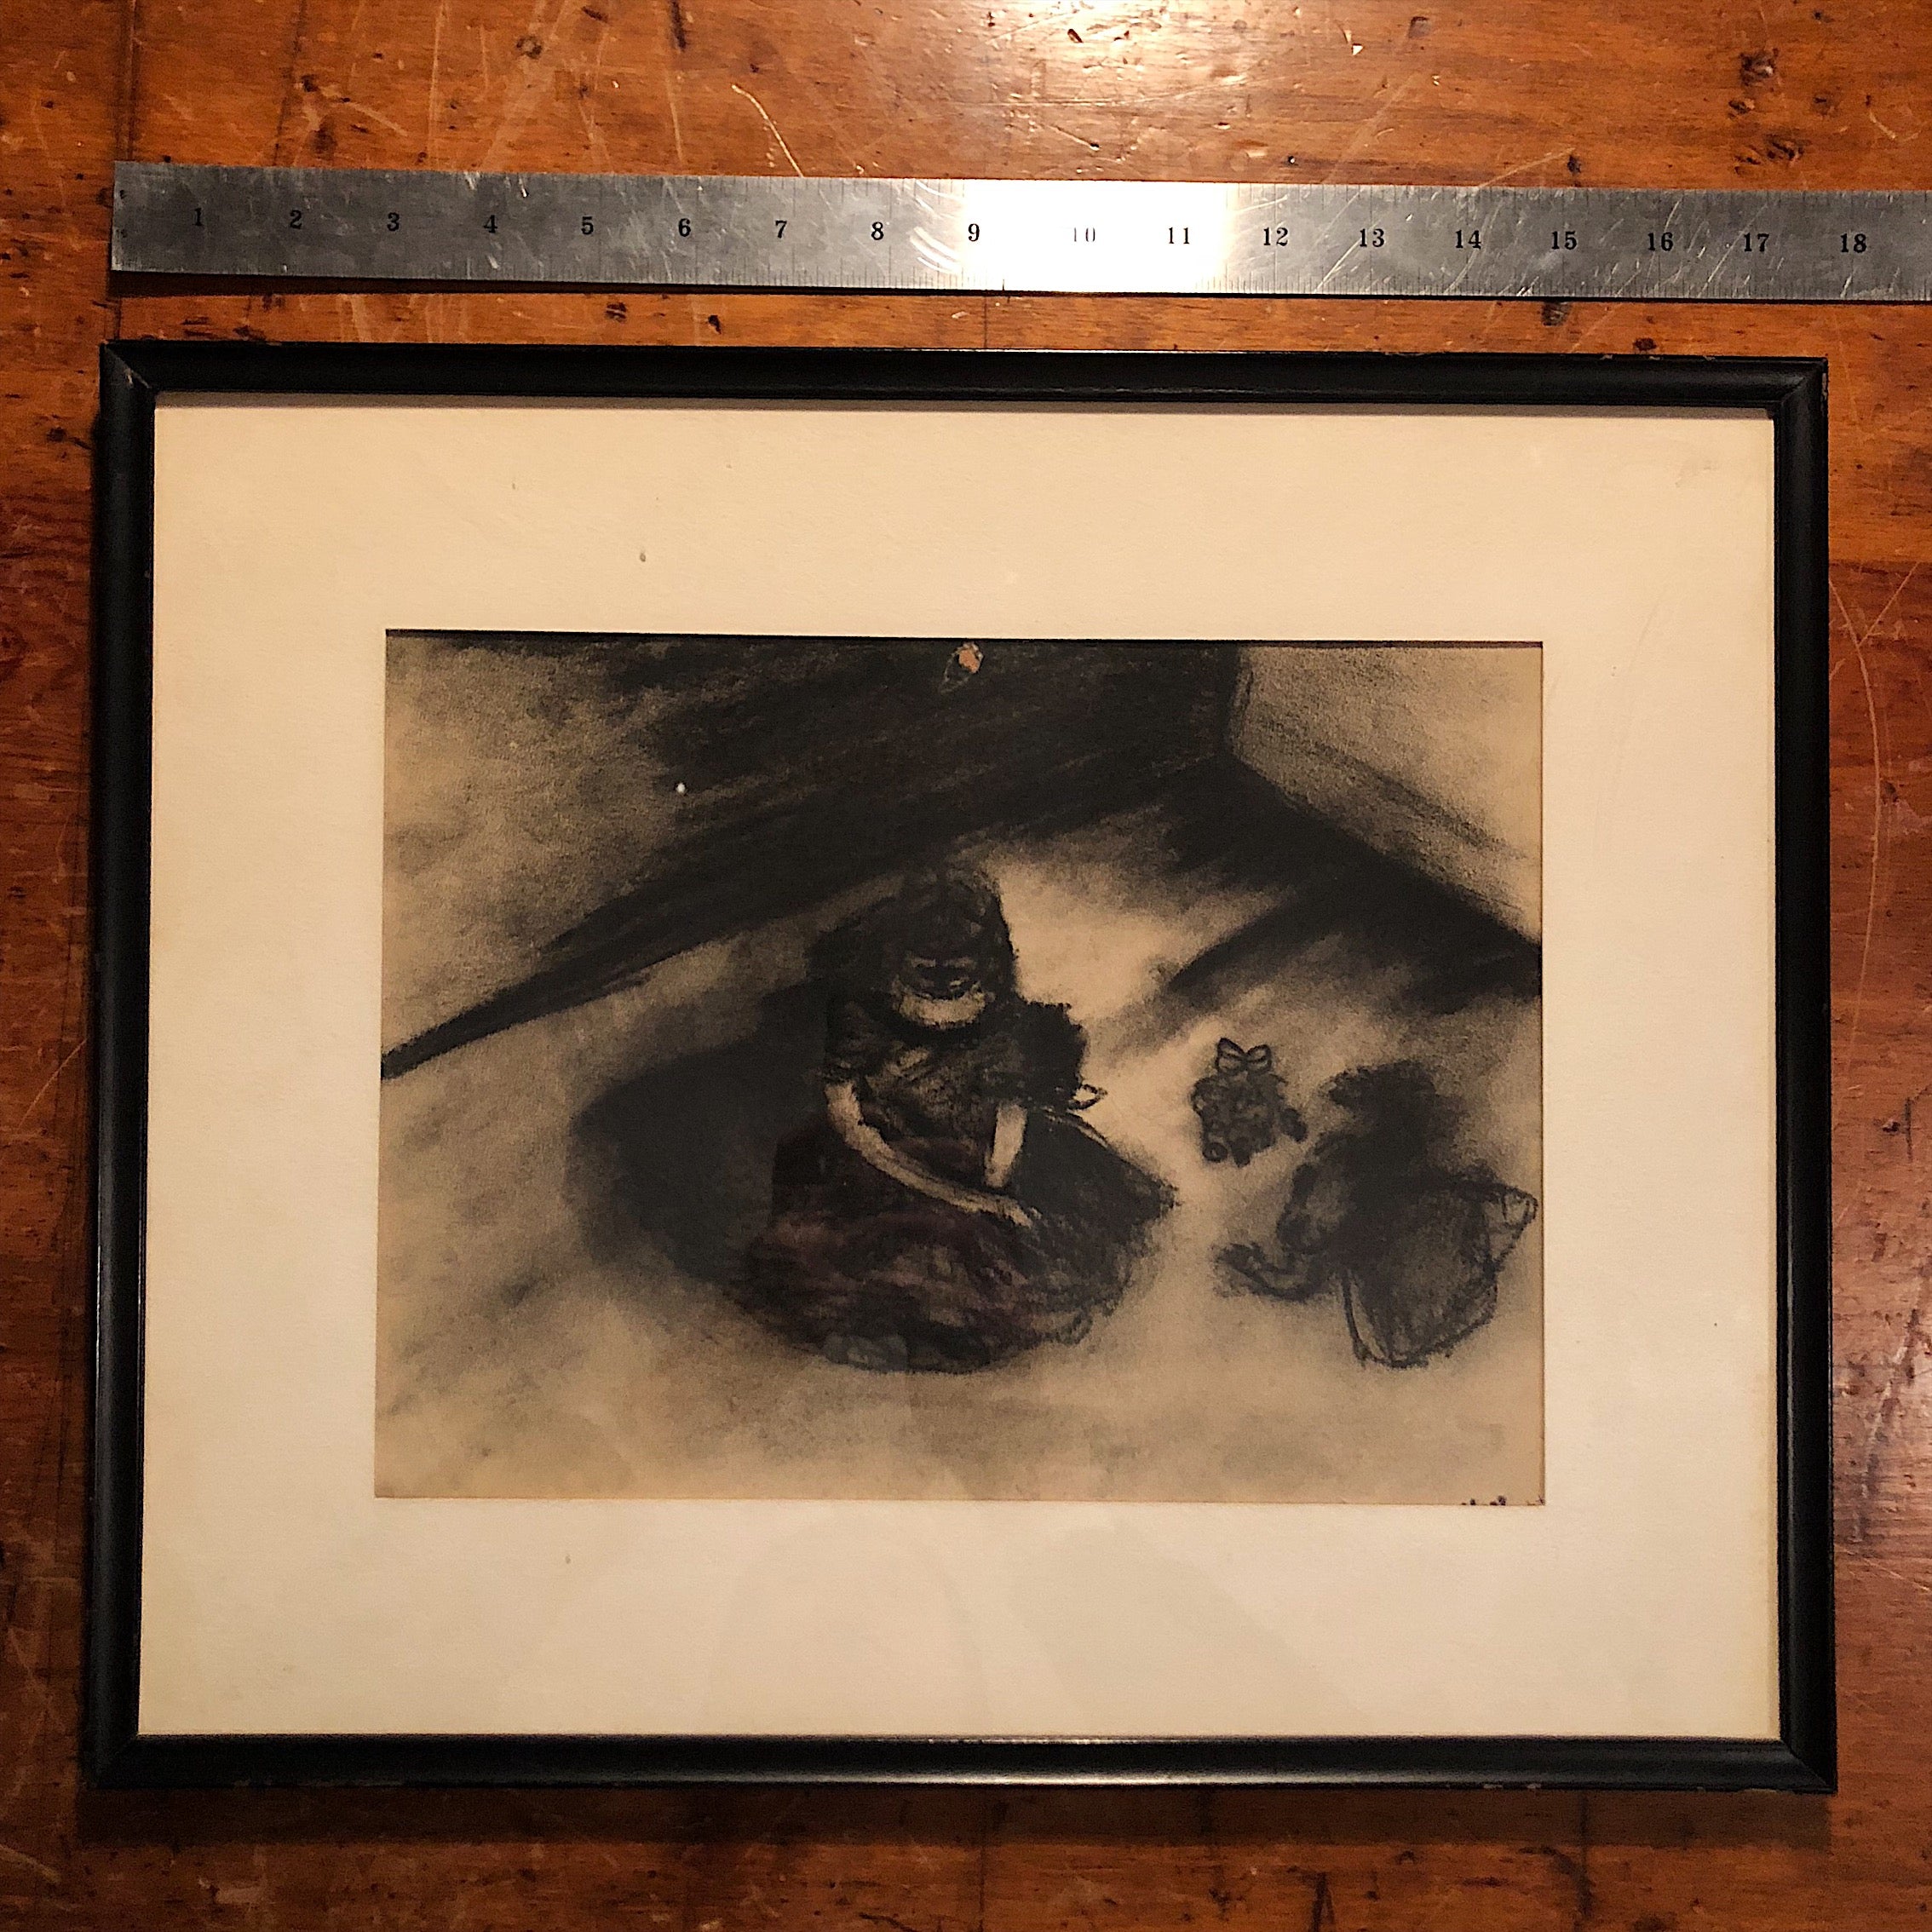 Vintage Charcoal Drawing of Girl with a Headless Doll - 1957 - Catholic School Art